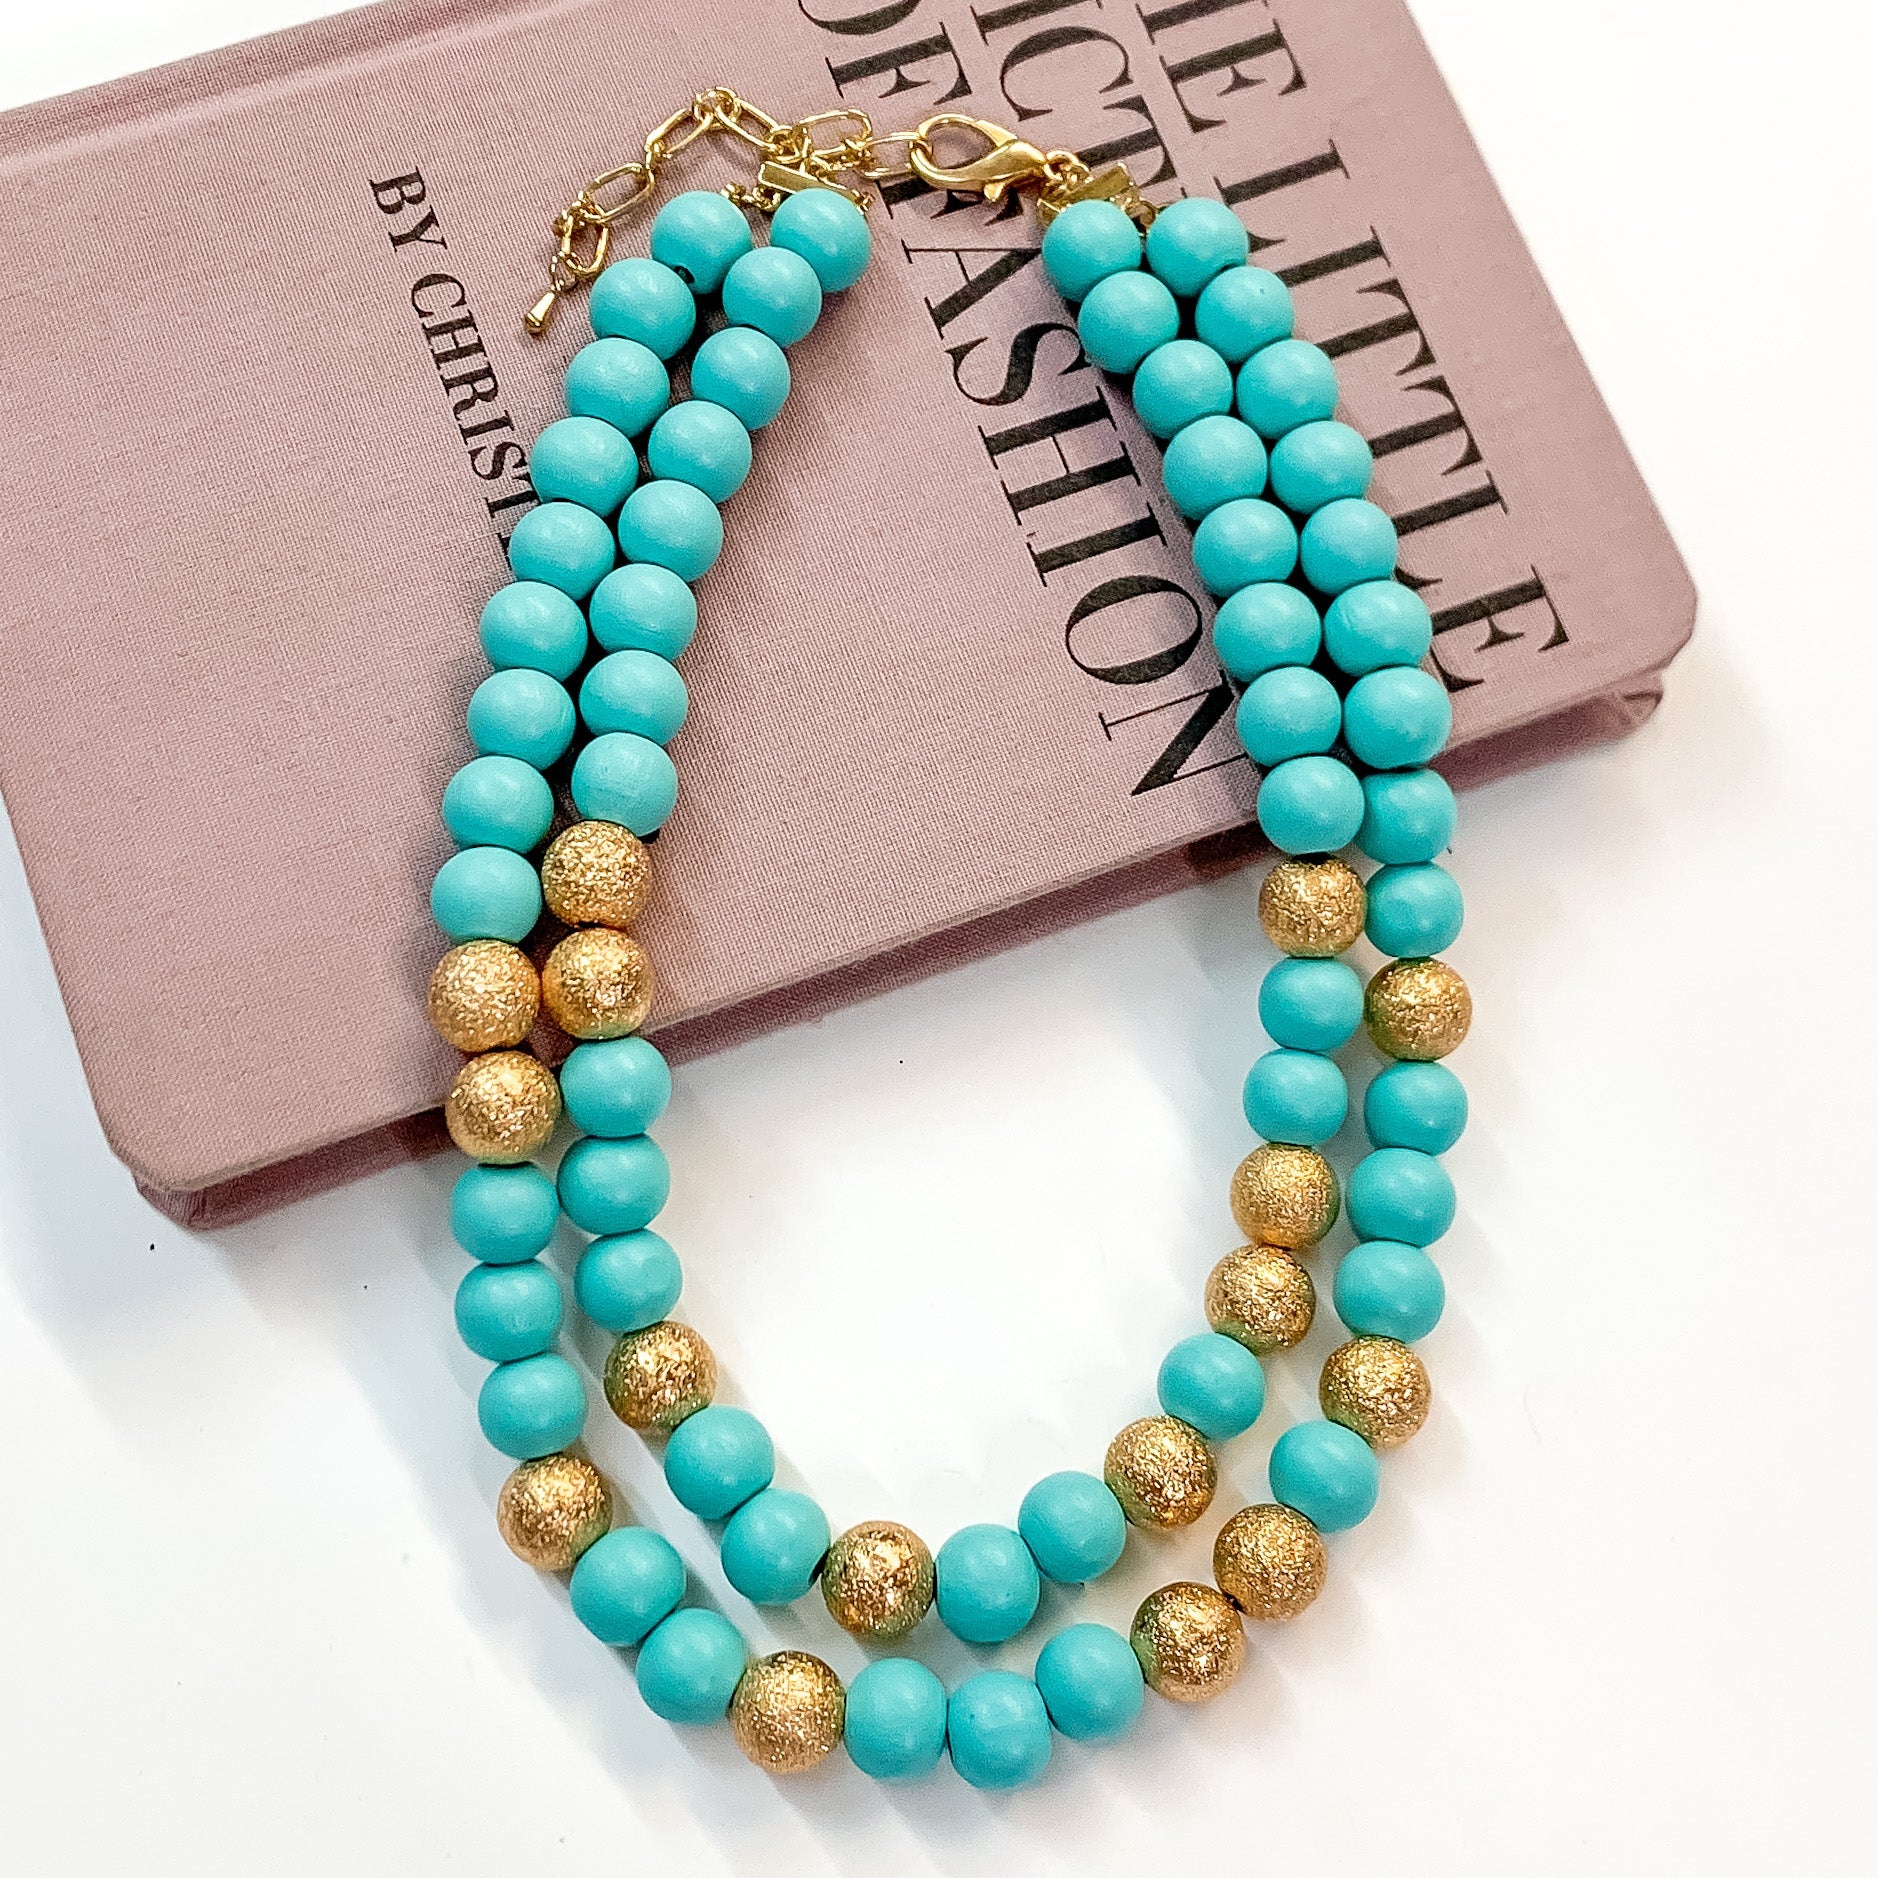 Pictured partially on a mauve colored book on a white background is a two strand sky blue beaded necklace with gold beaded spacers and gold hardware. 